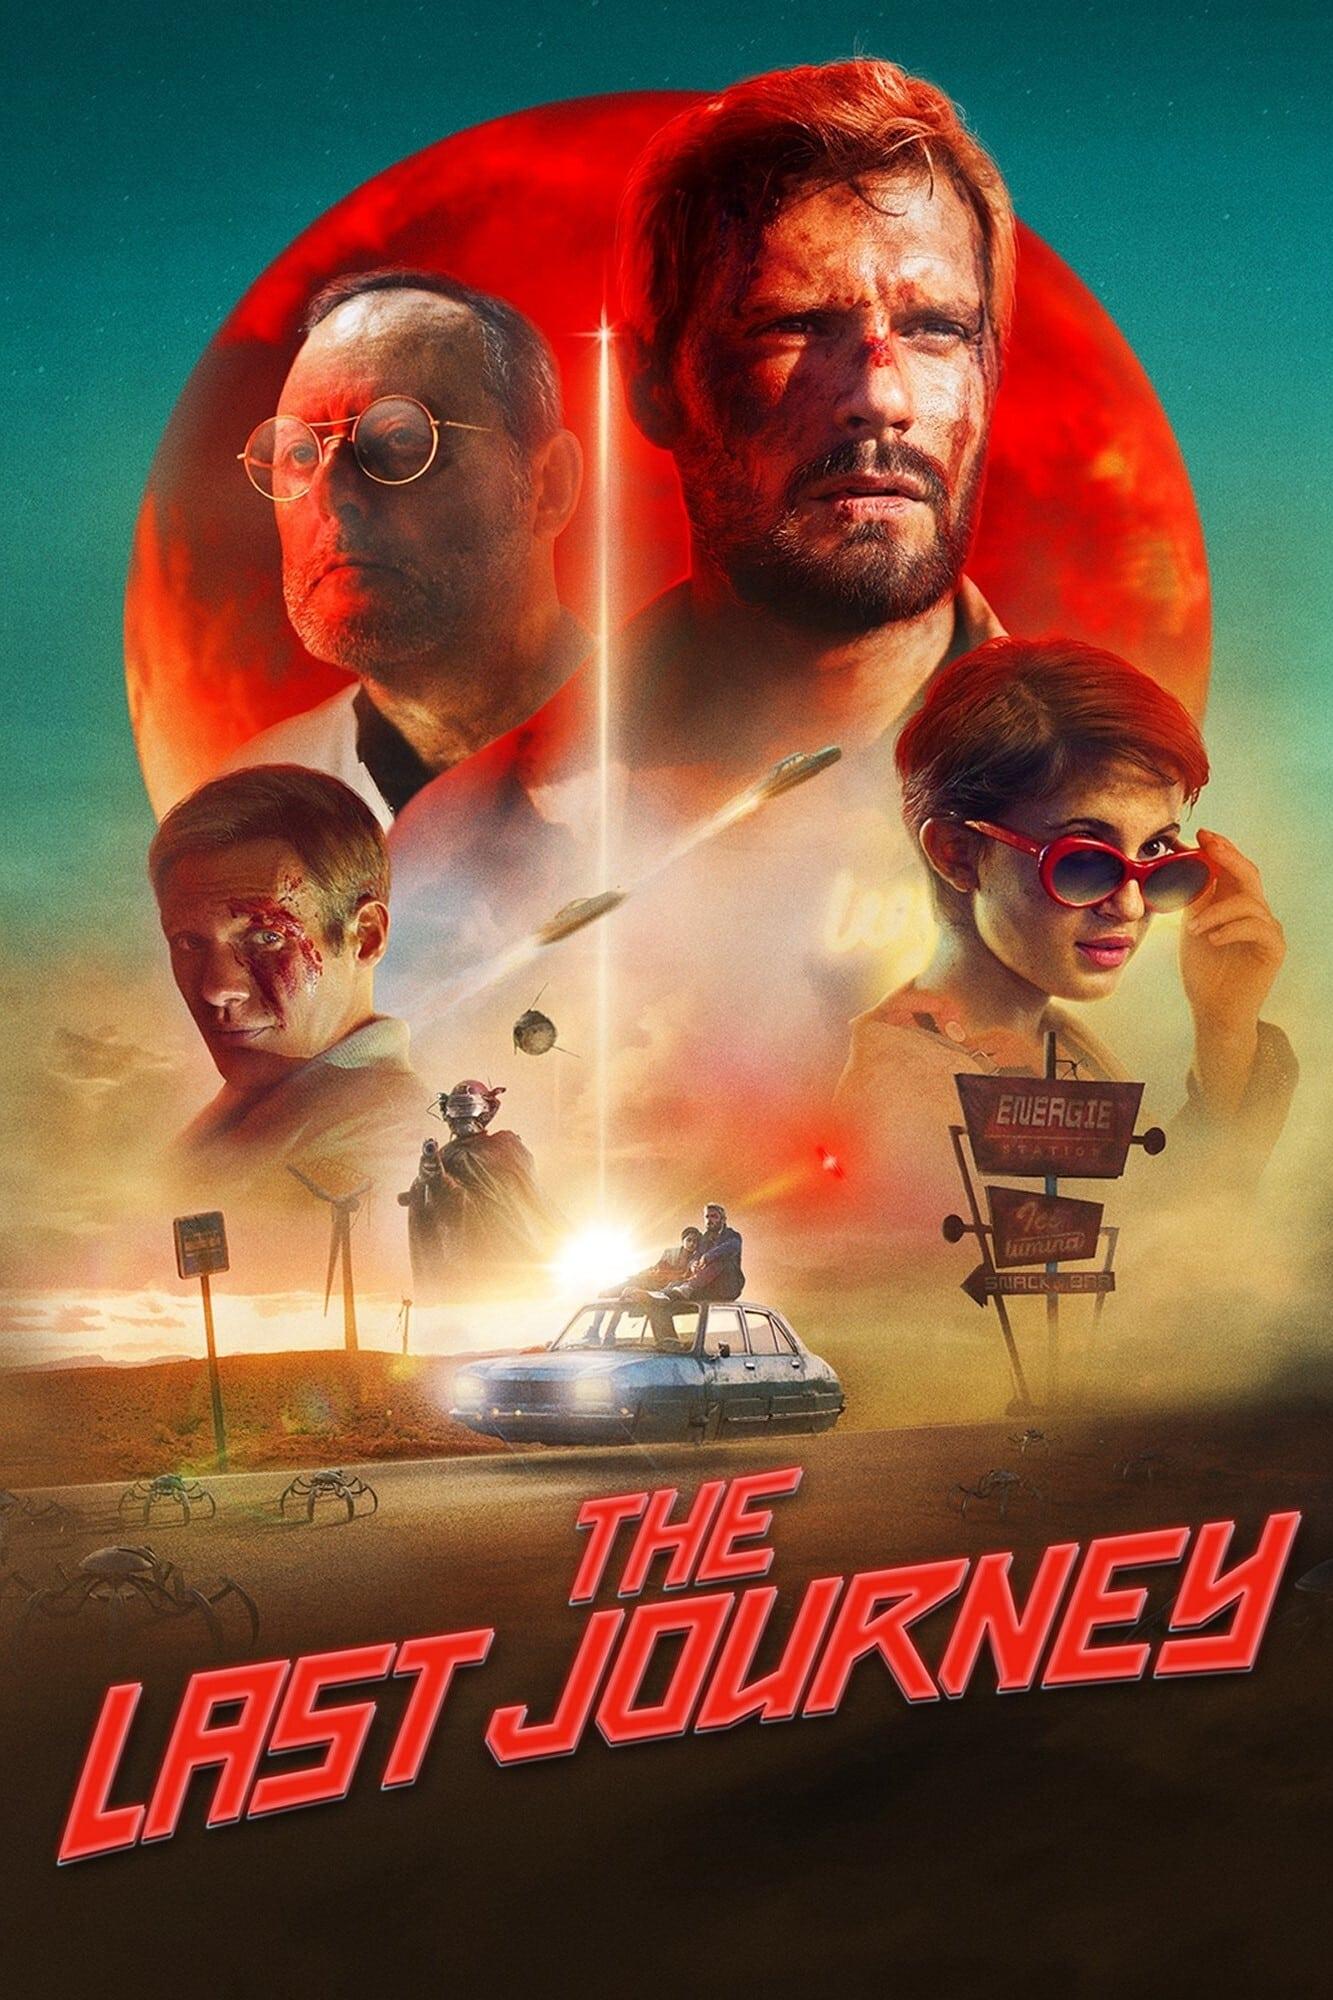 The Last Journey poster